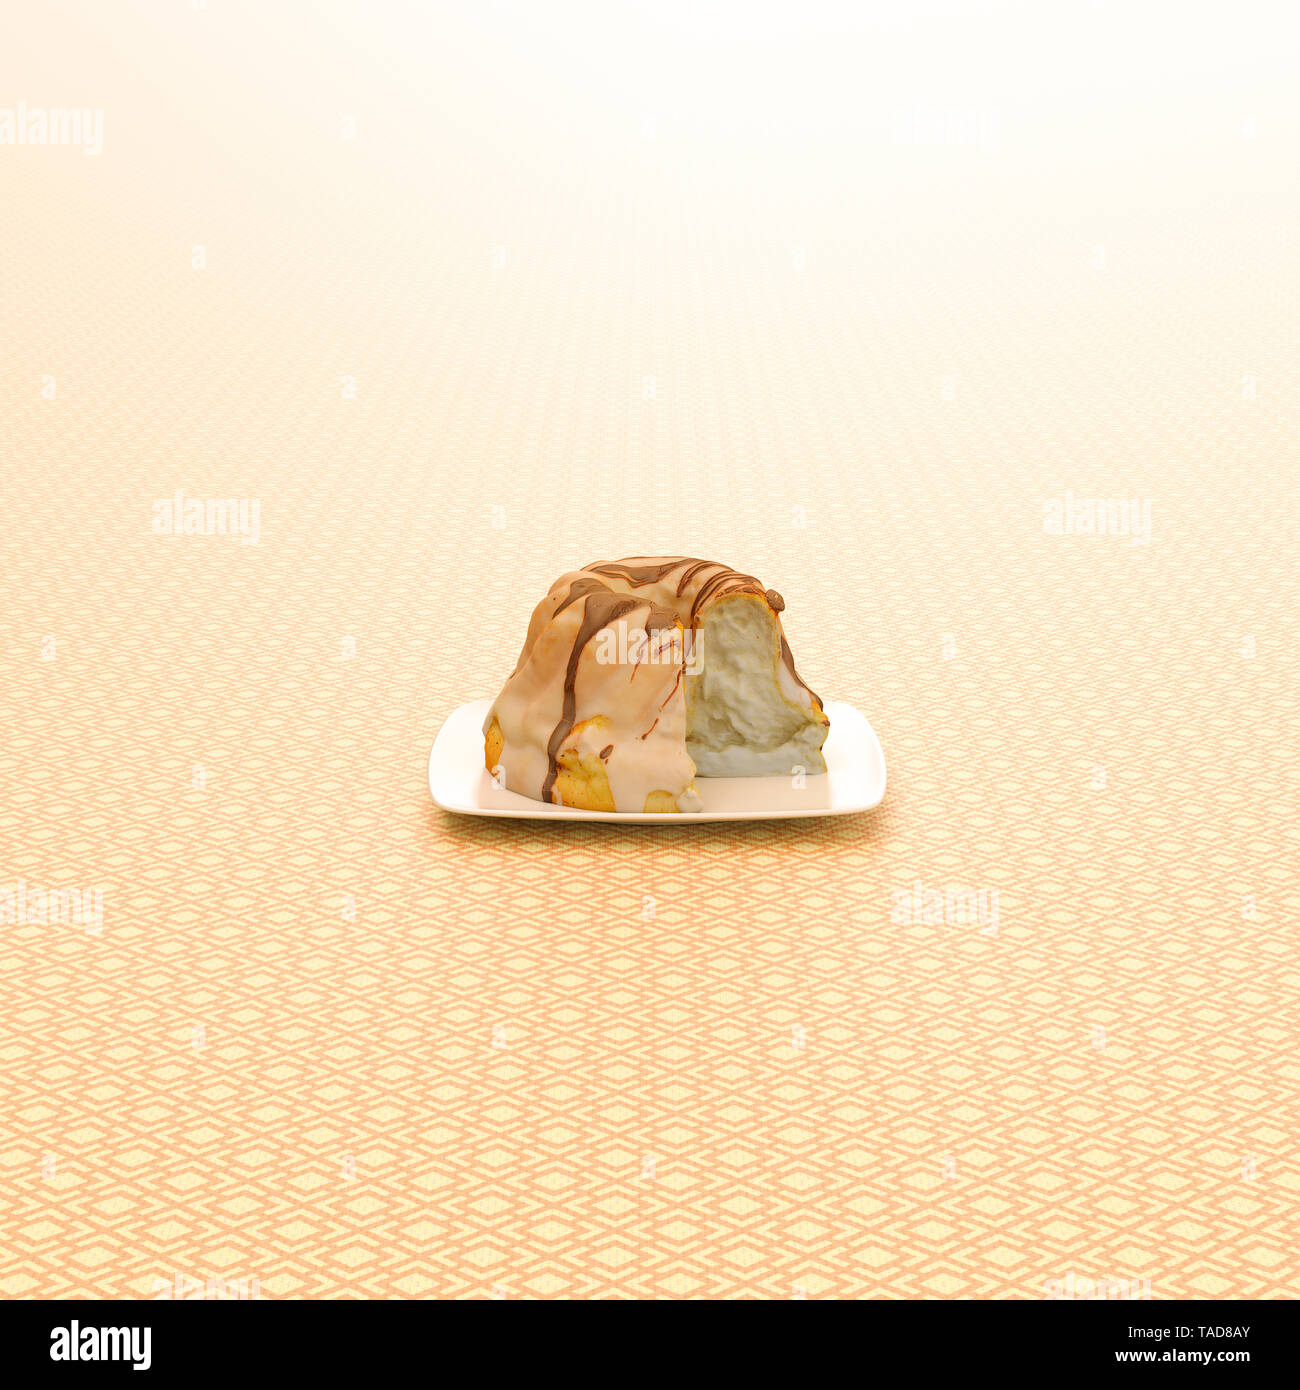 3D rendering, Ring cake on patterned background Stock Photo